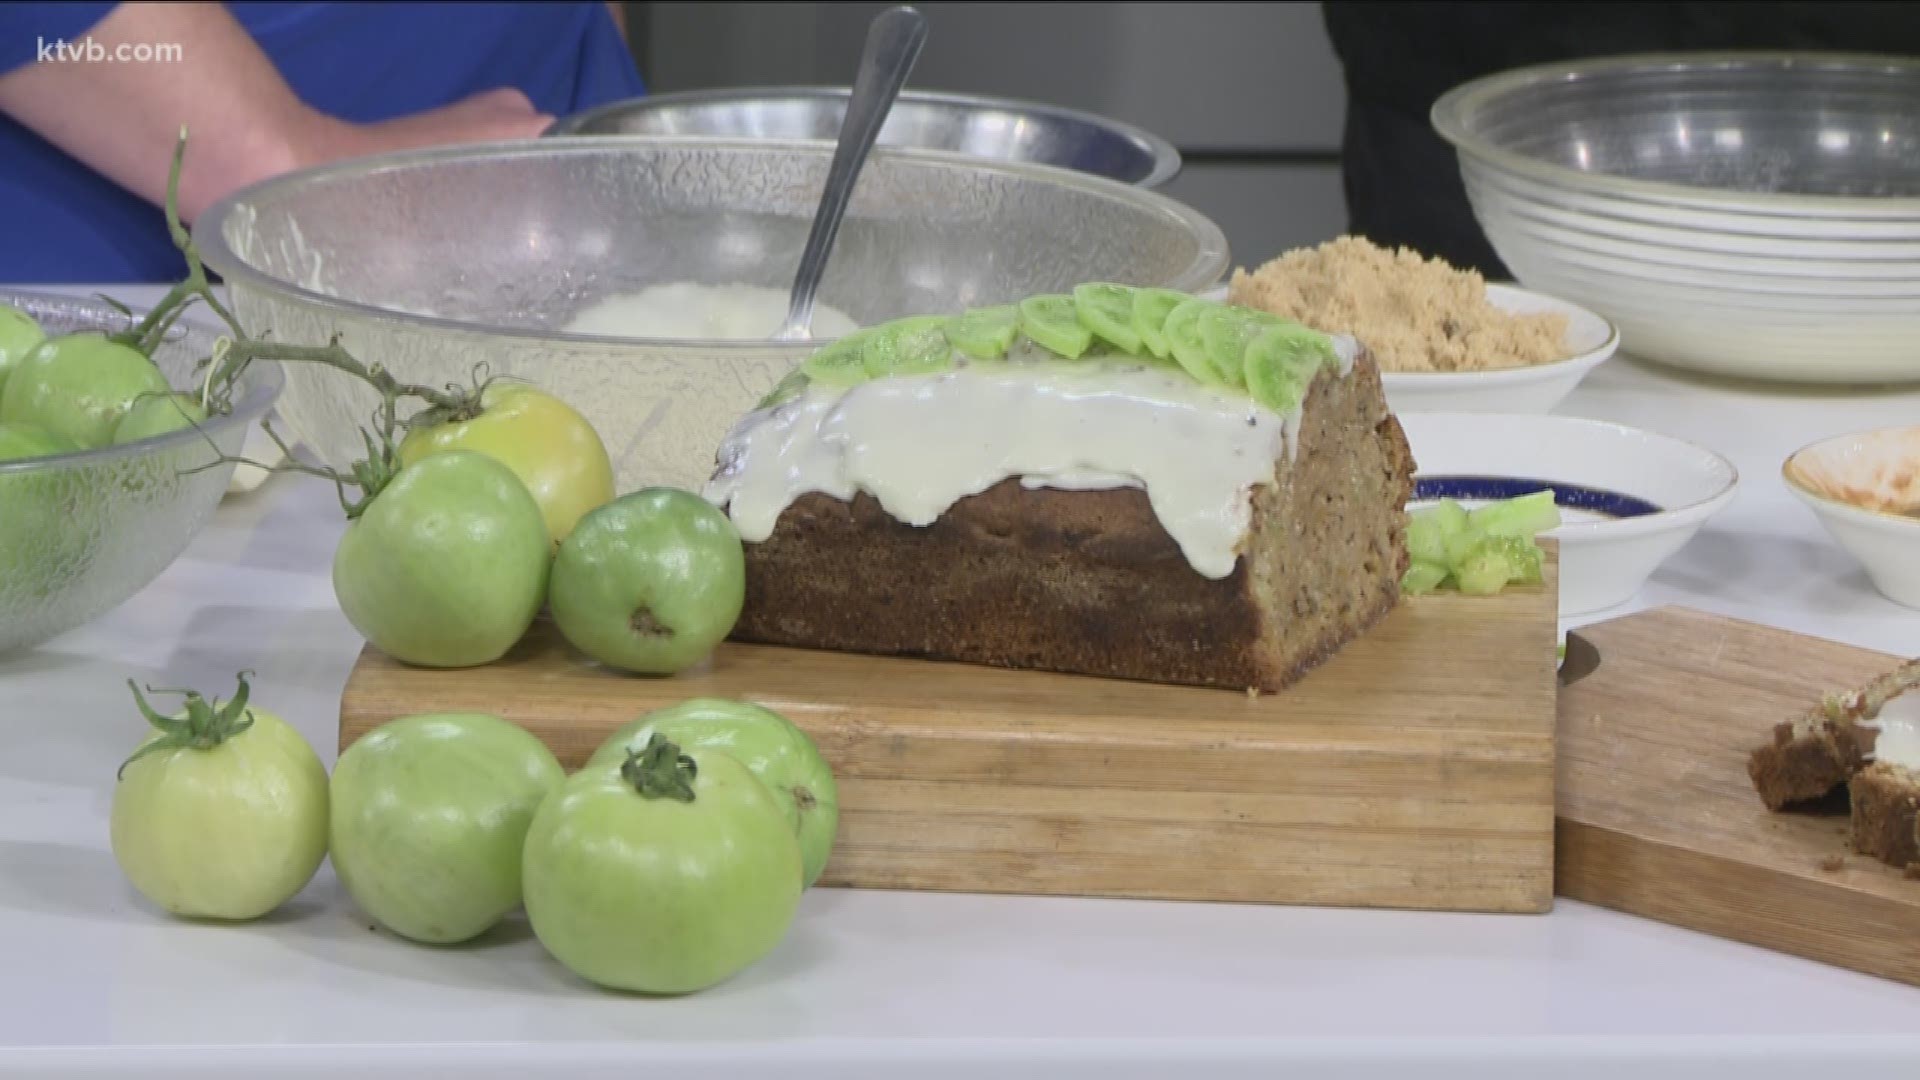 Chef Lou shared the recipe with our viewers during the Saturday Morning News.